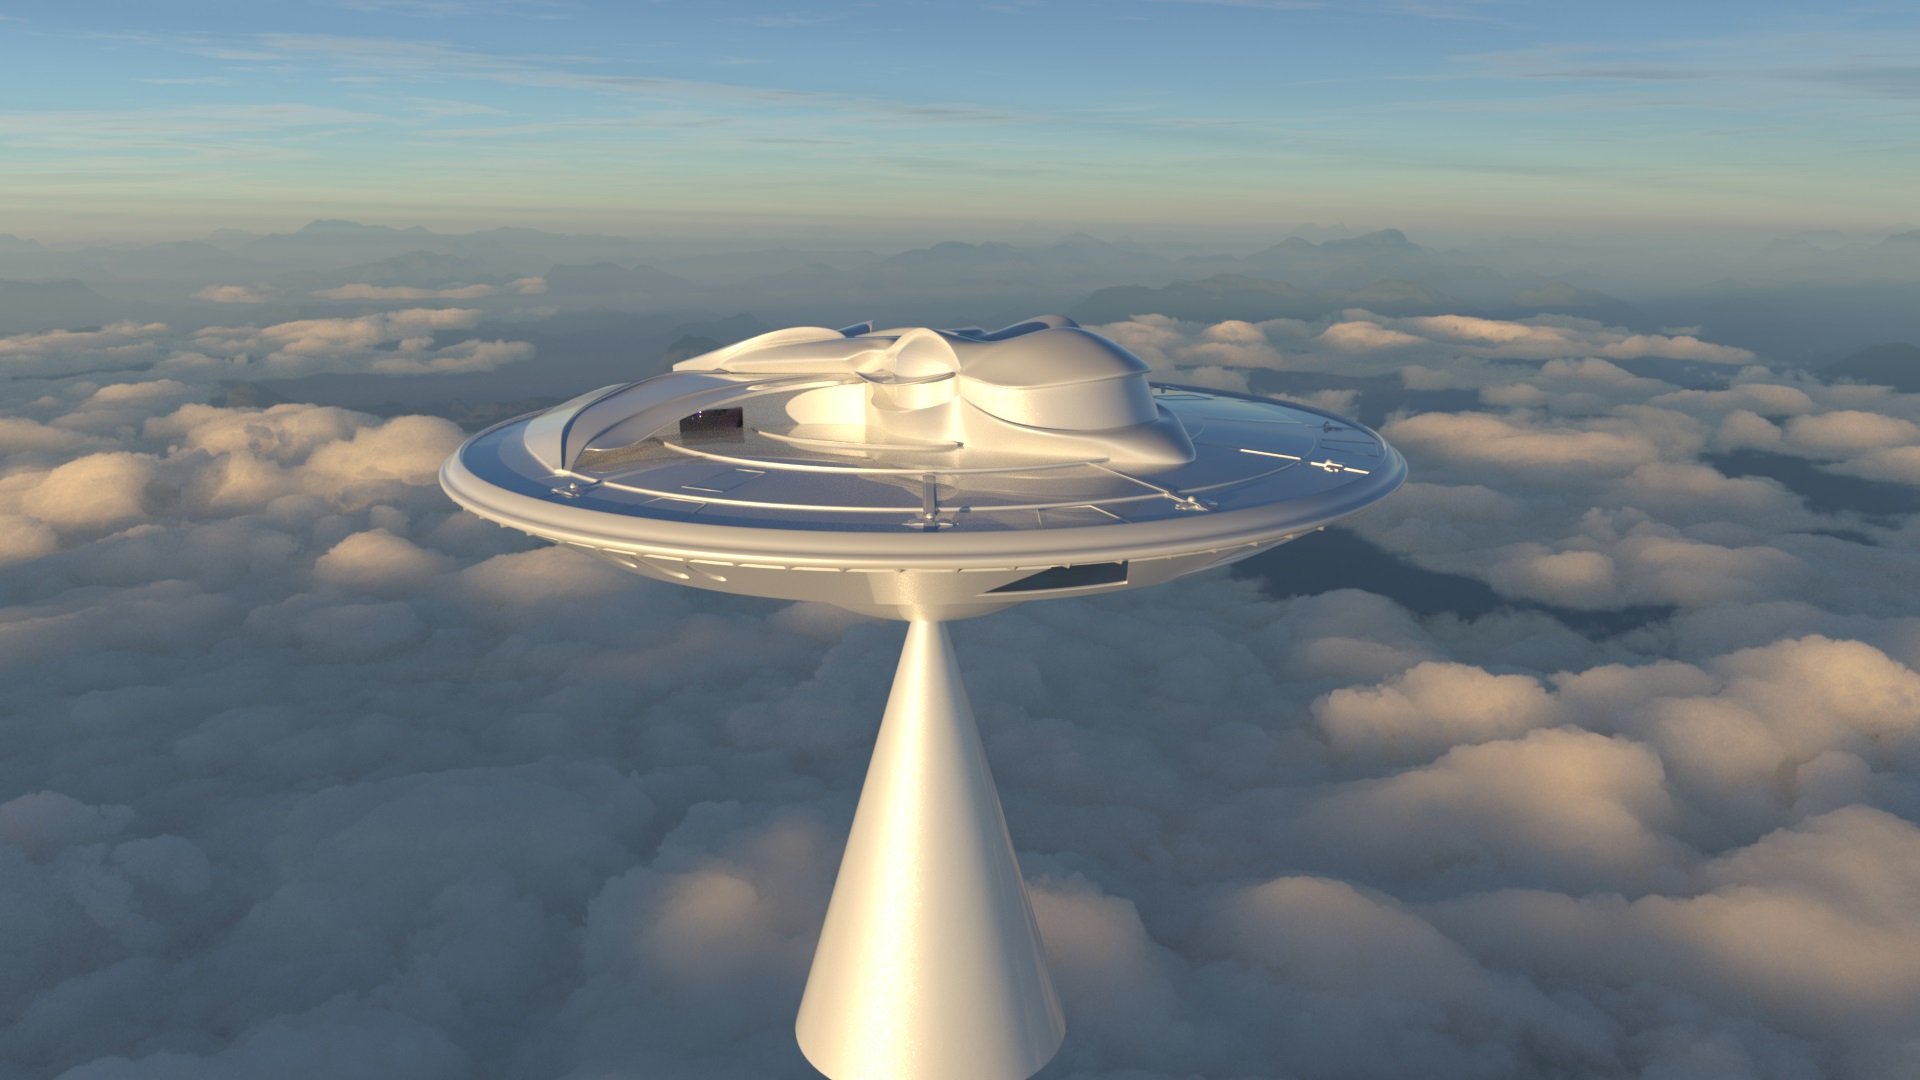 PW UFO Starship Class by: PW Productions, 3D Models by Daz 3D